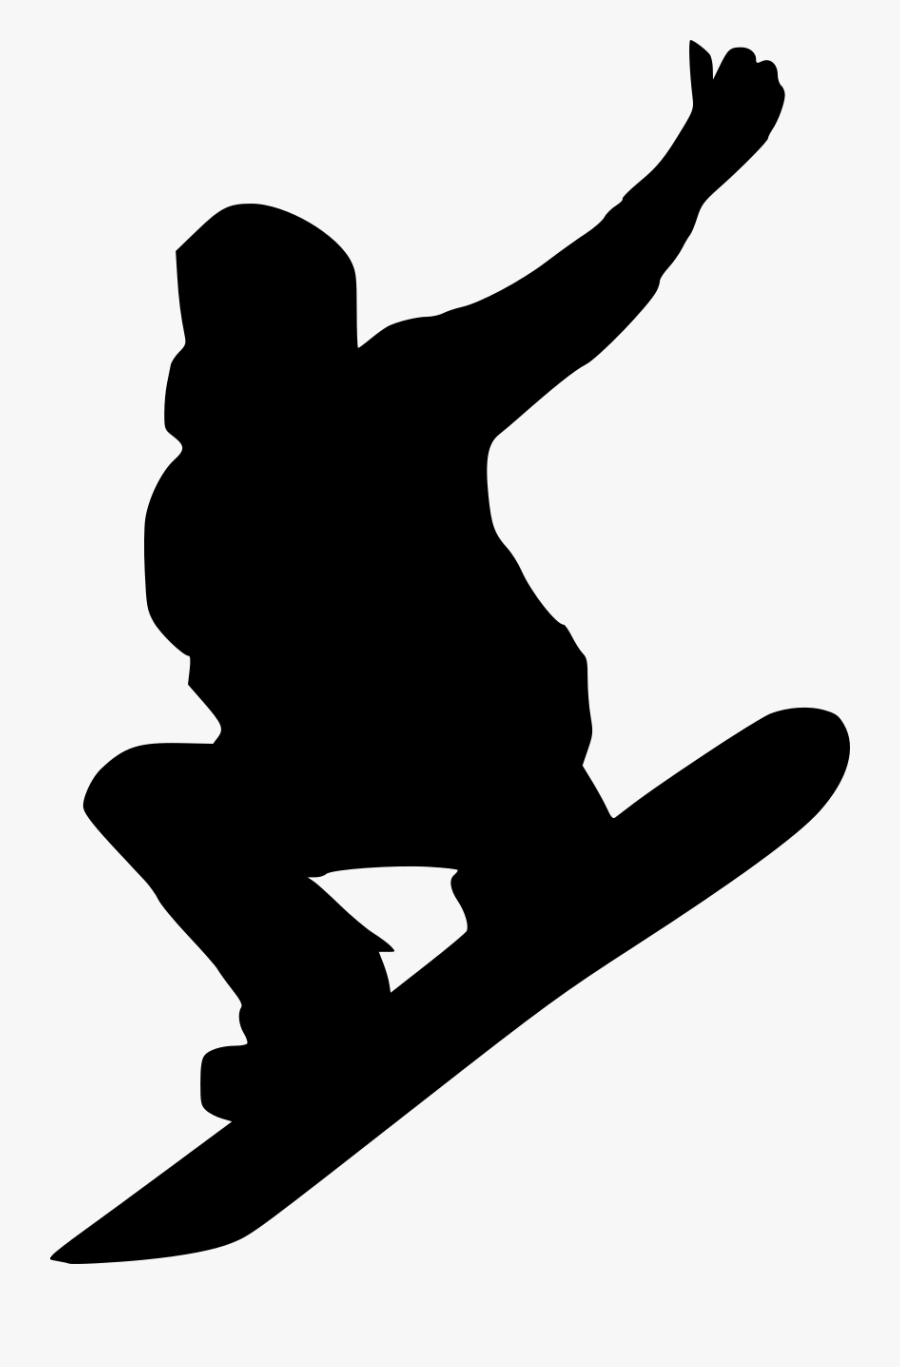 Snowboarder Silhouette Png - Snowboarder Png, Transparent Clipart